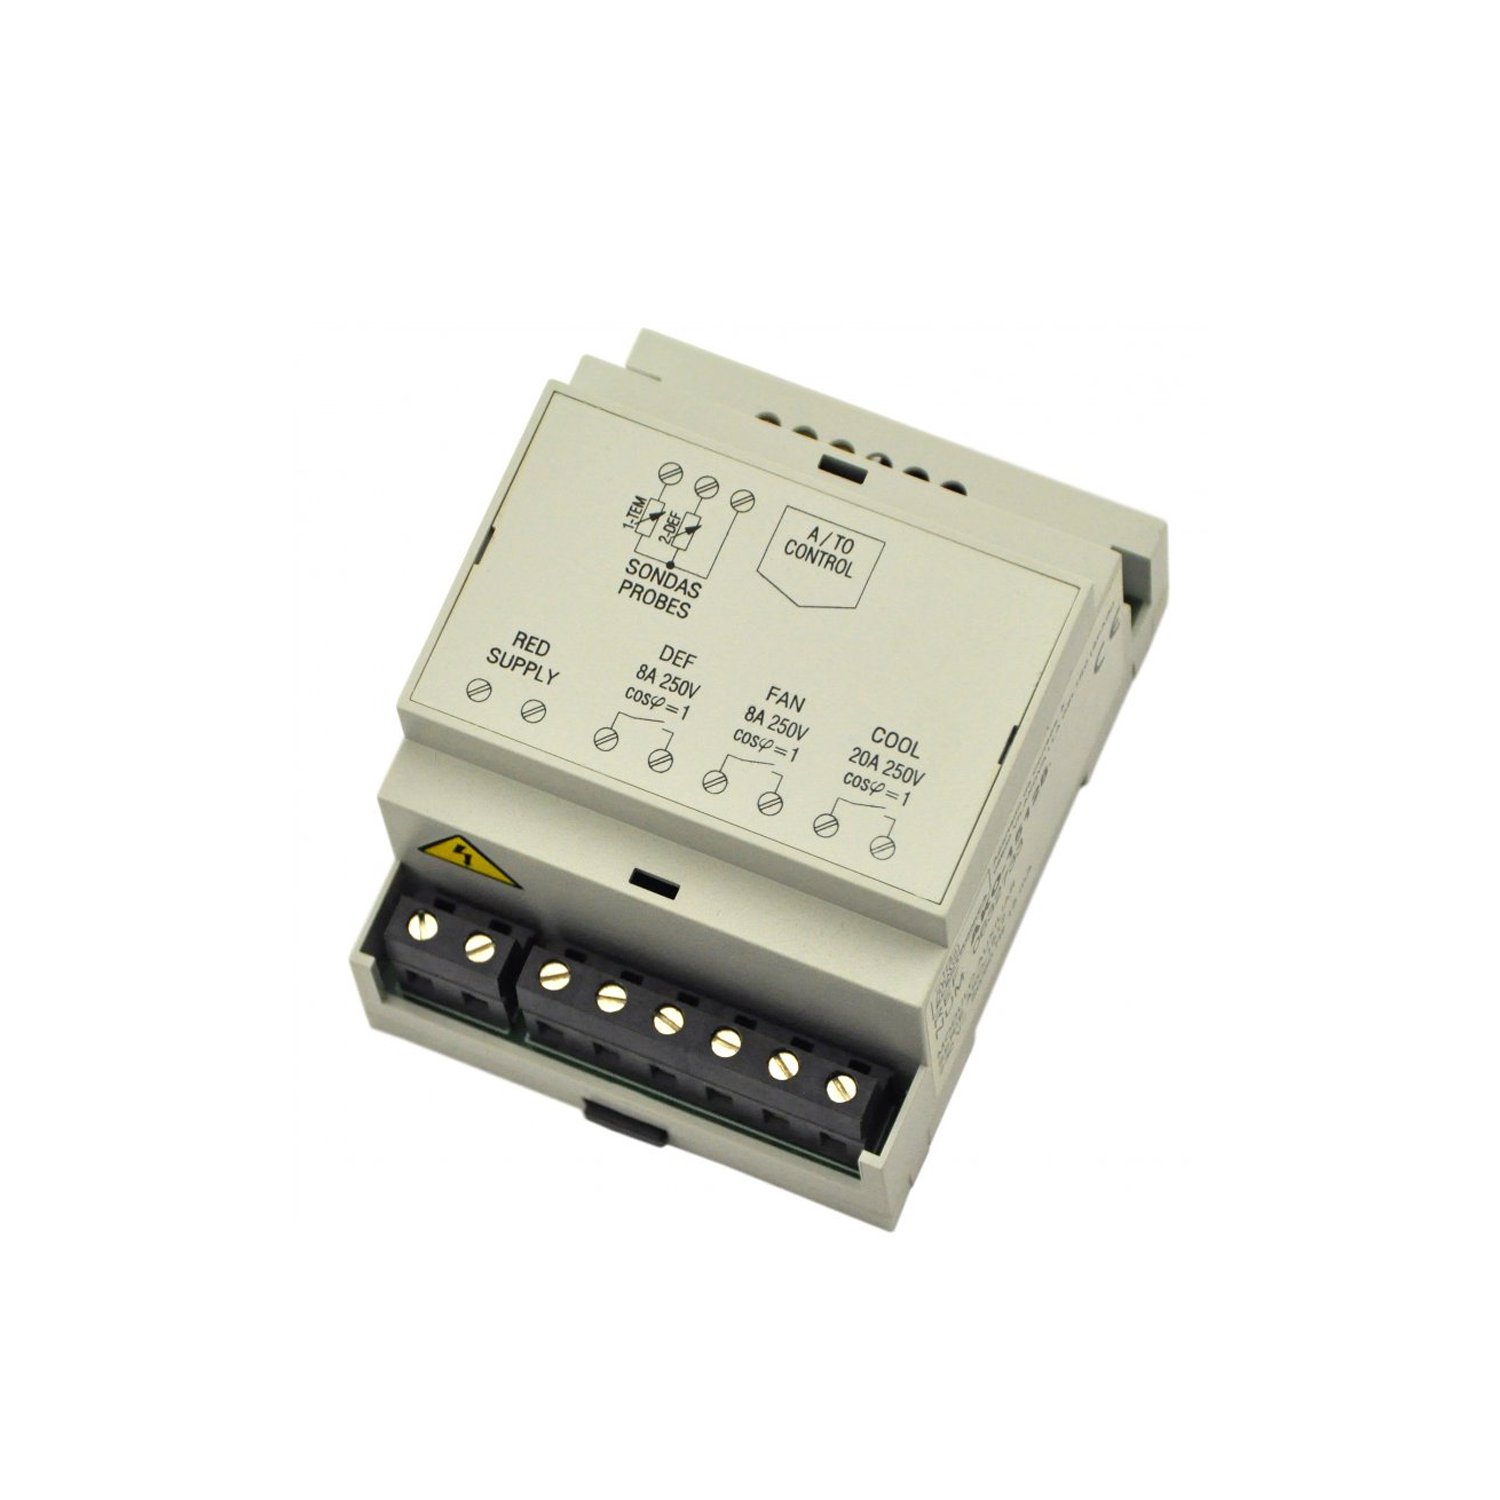 Load module AKO 15128 230V AC, NTC relay outputs 3, without control